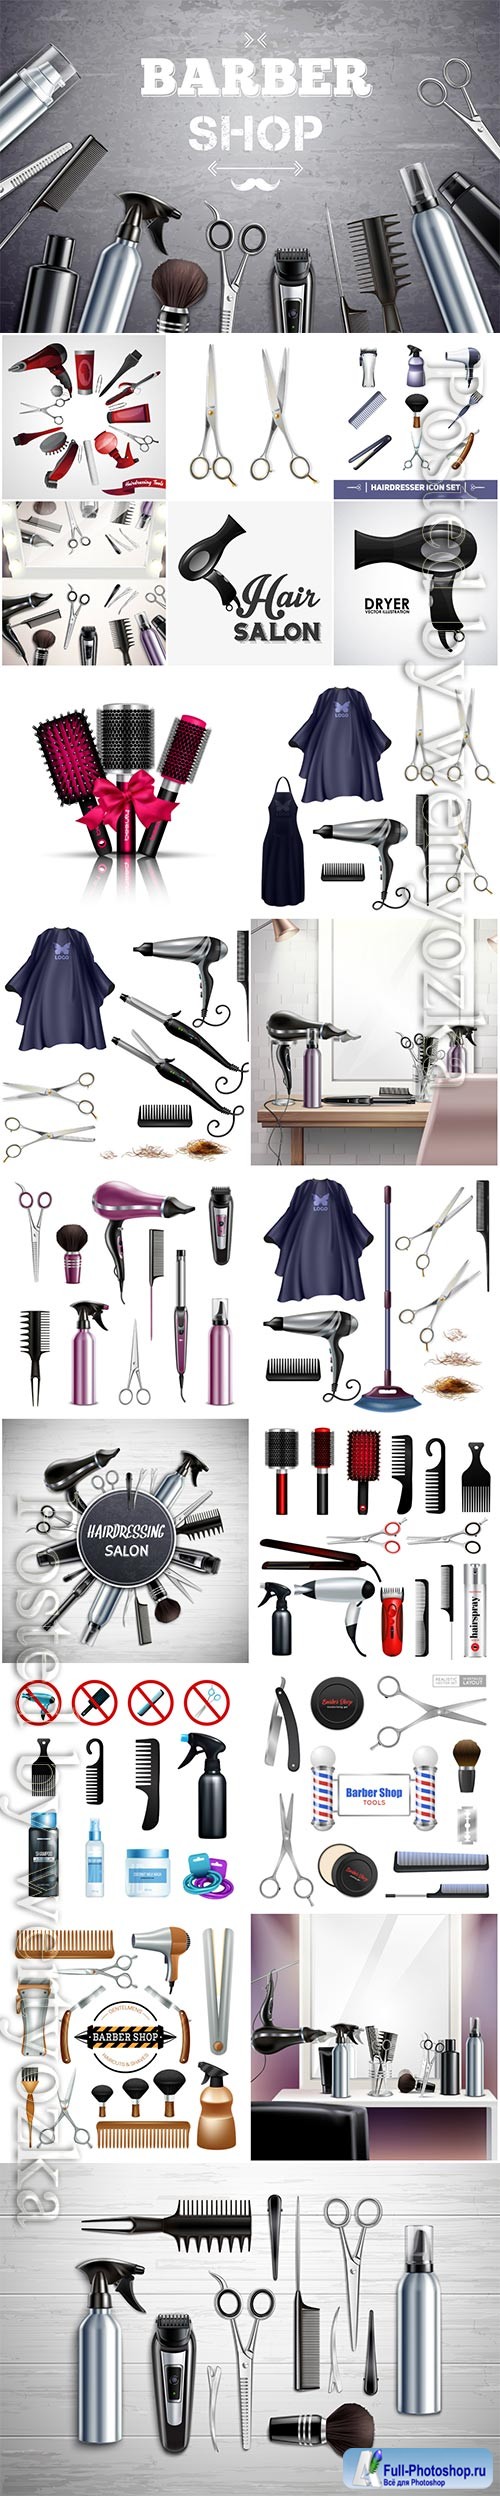 Barbershop hairdresser tools and accessories vector illustration